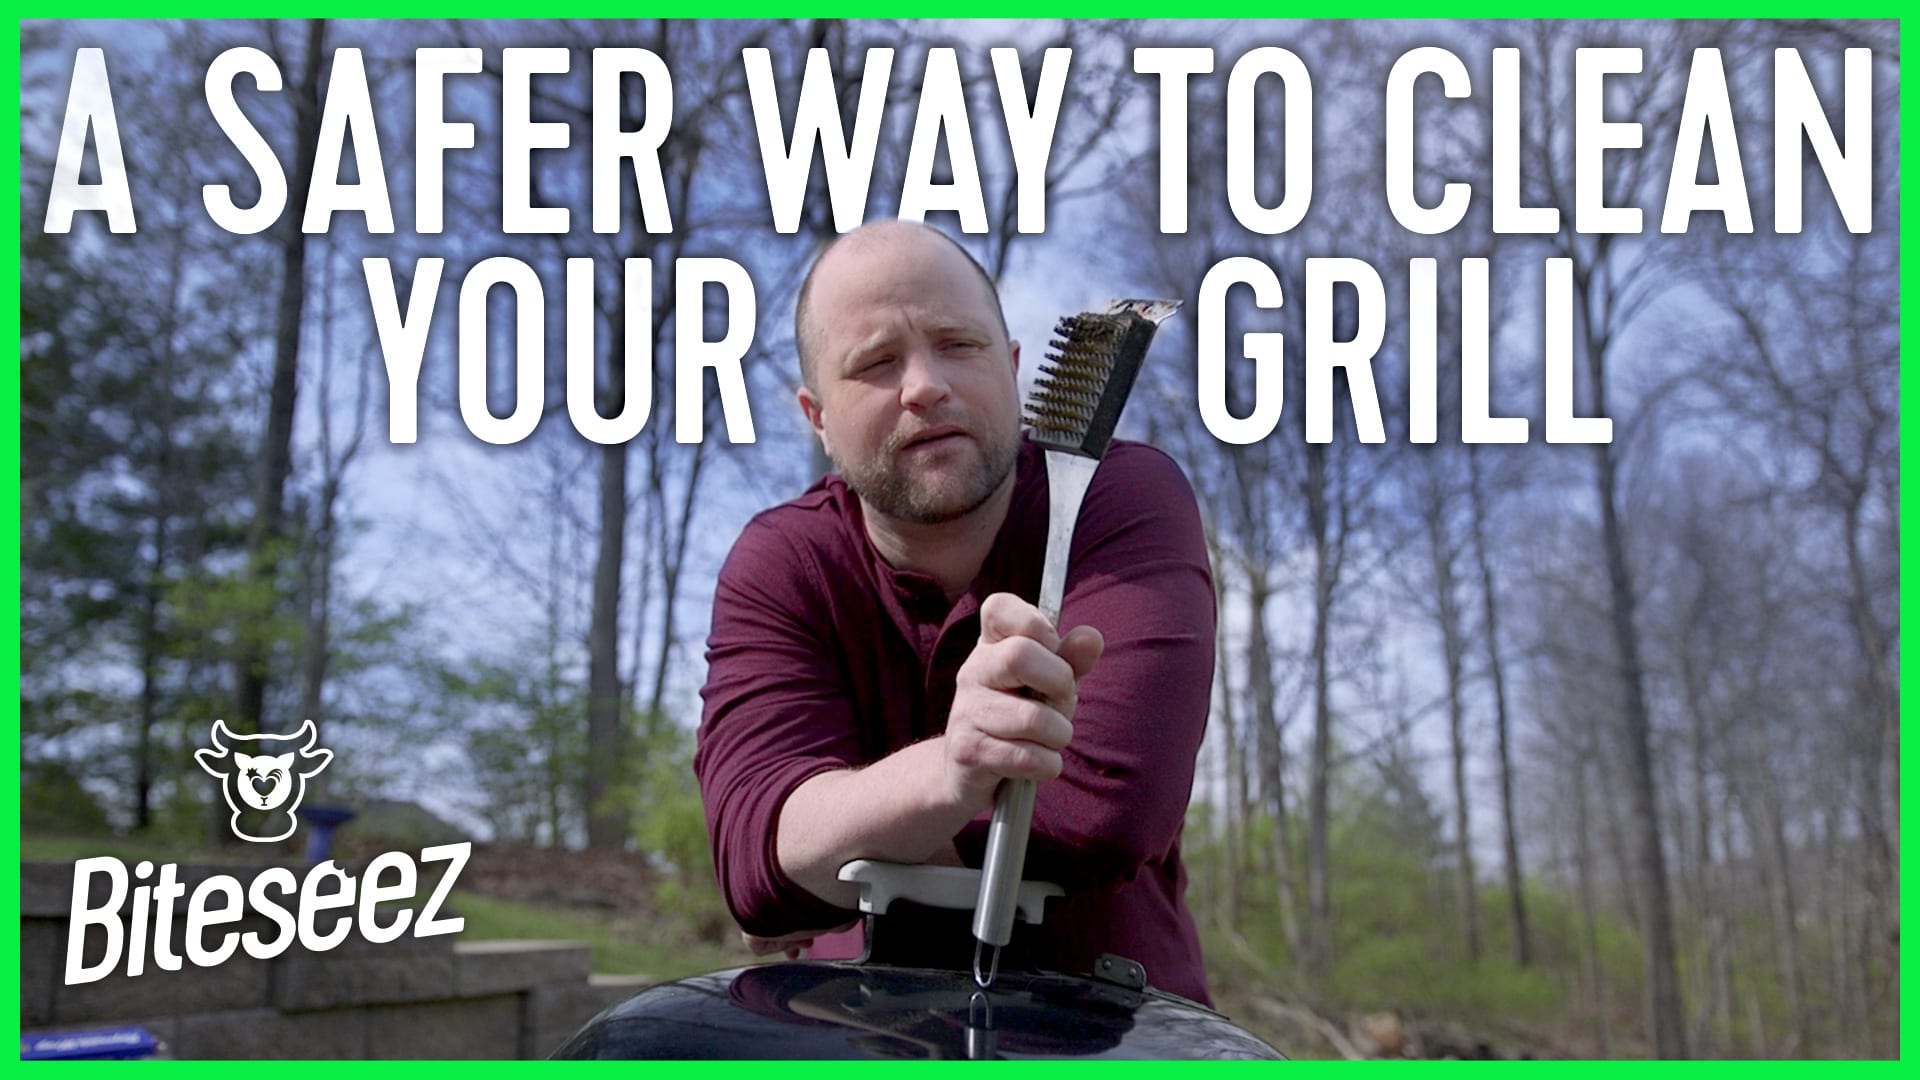 Bristled by wire brushes? Here are alternatives for cleaning your barbecue